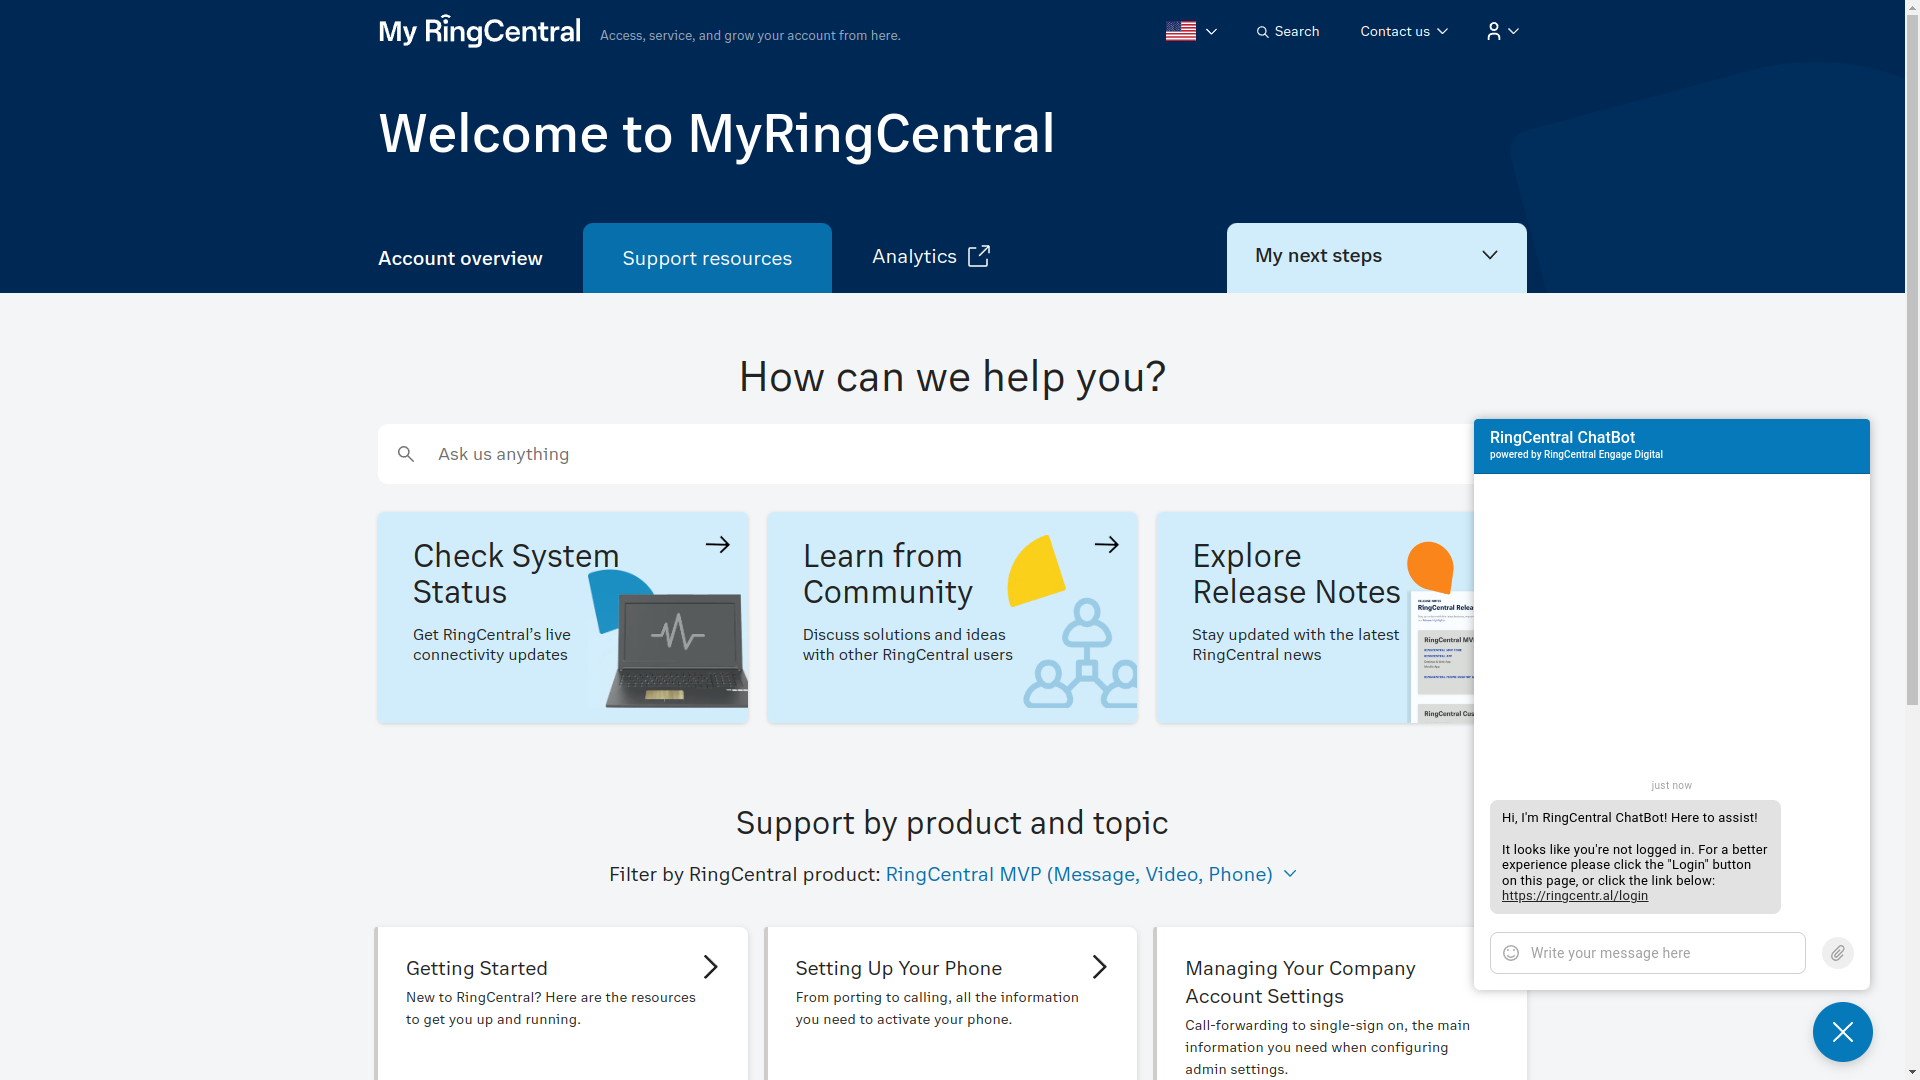 RingCentral Contact Center support